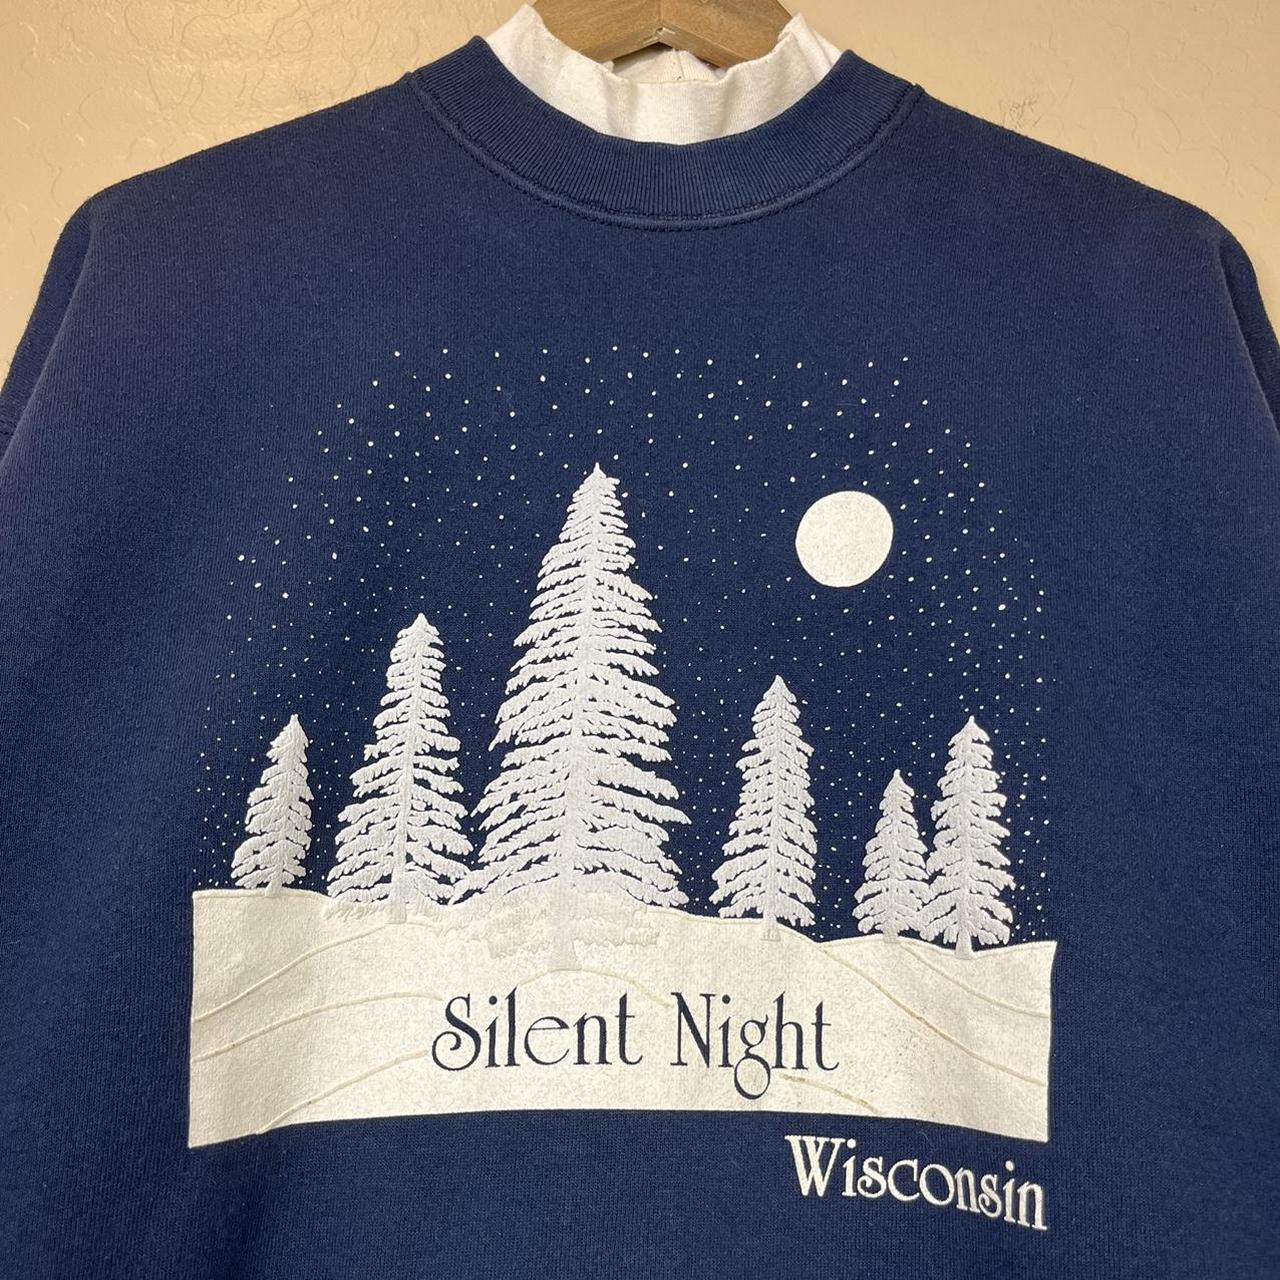 Product Image 2 - ~Vintage 90’s Wisconsin Silent Night